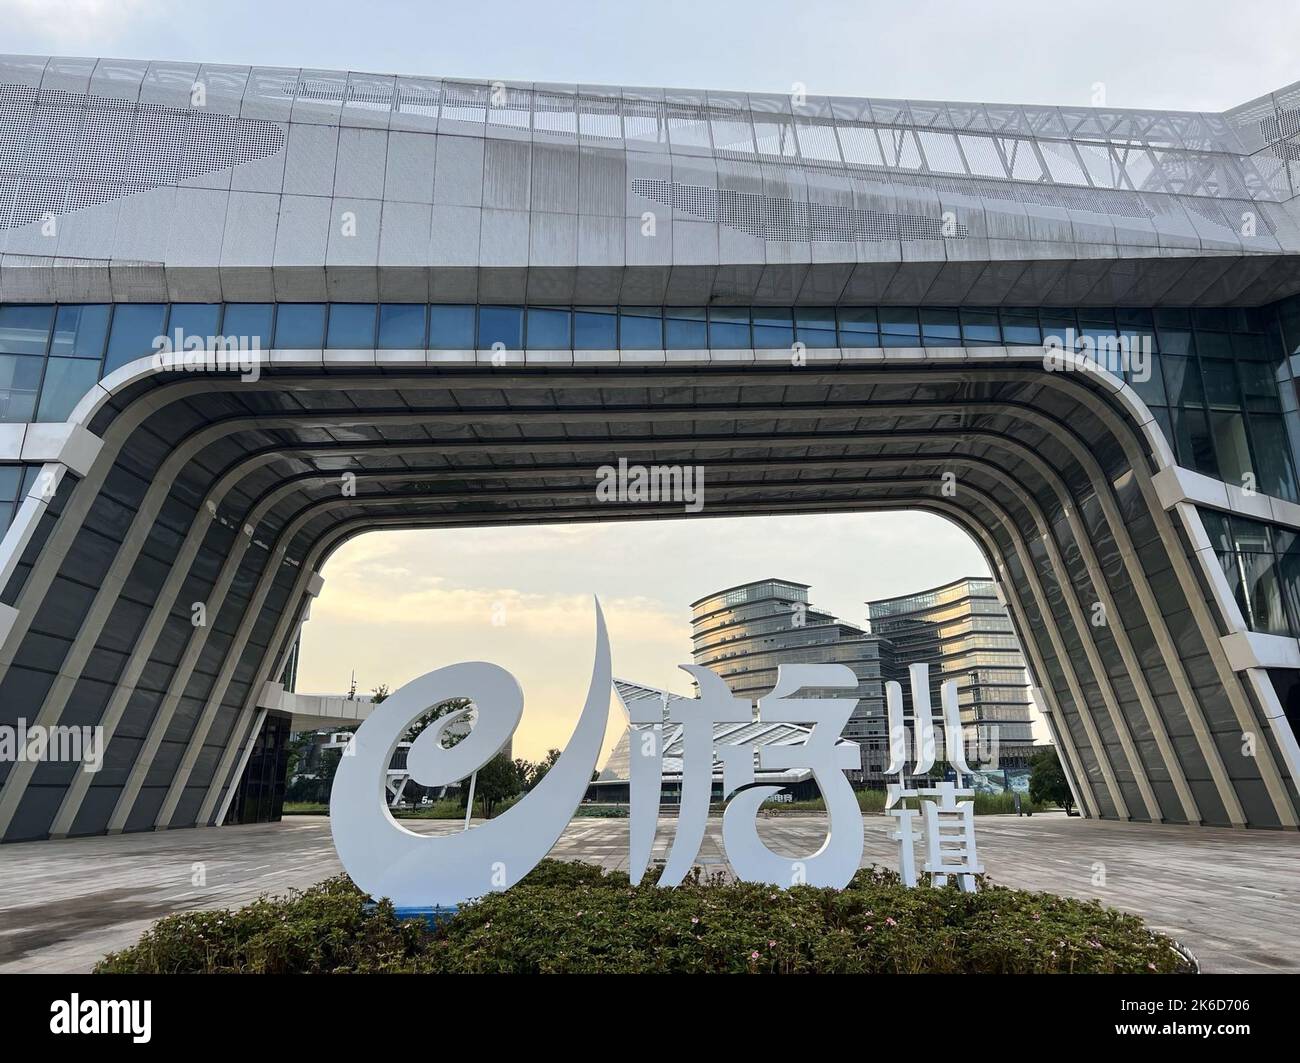 The entrance to E-Game Town in Shangyu district, part of the city of Shaoxing in Zhejiang province. Six years after its foundation, the e-game town has grown from a rapeseed farmland into a model park in digital economy development. 04OCT22  Photo: SCMP/ Ann Cao Stock Photo